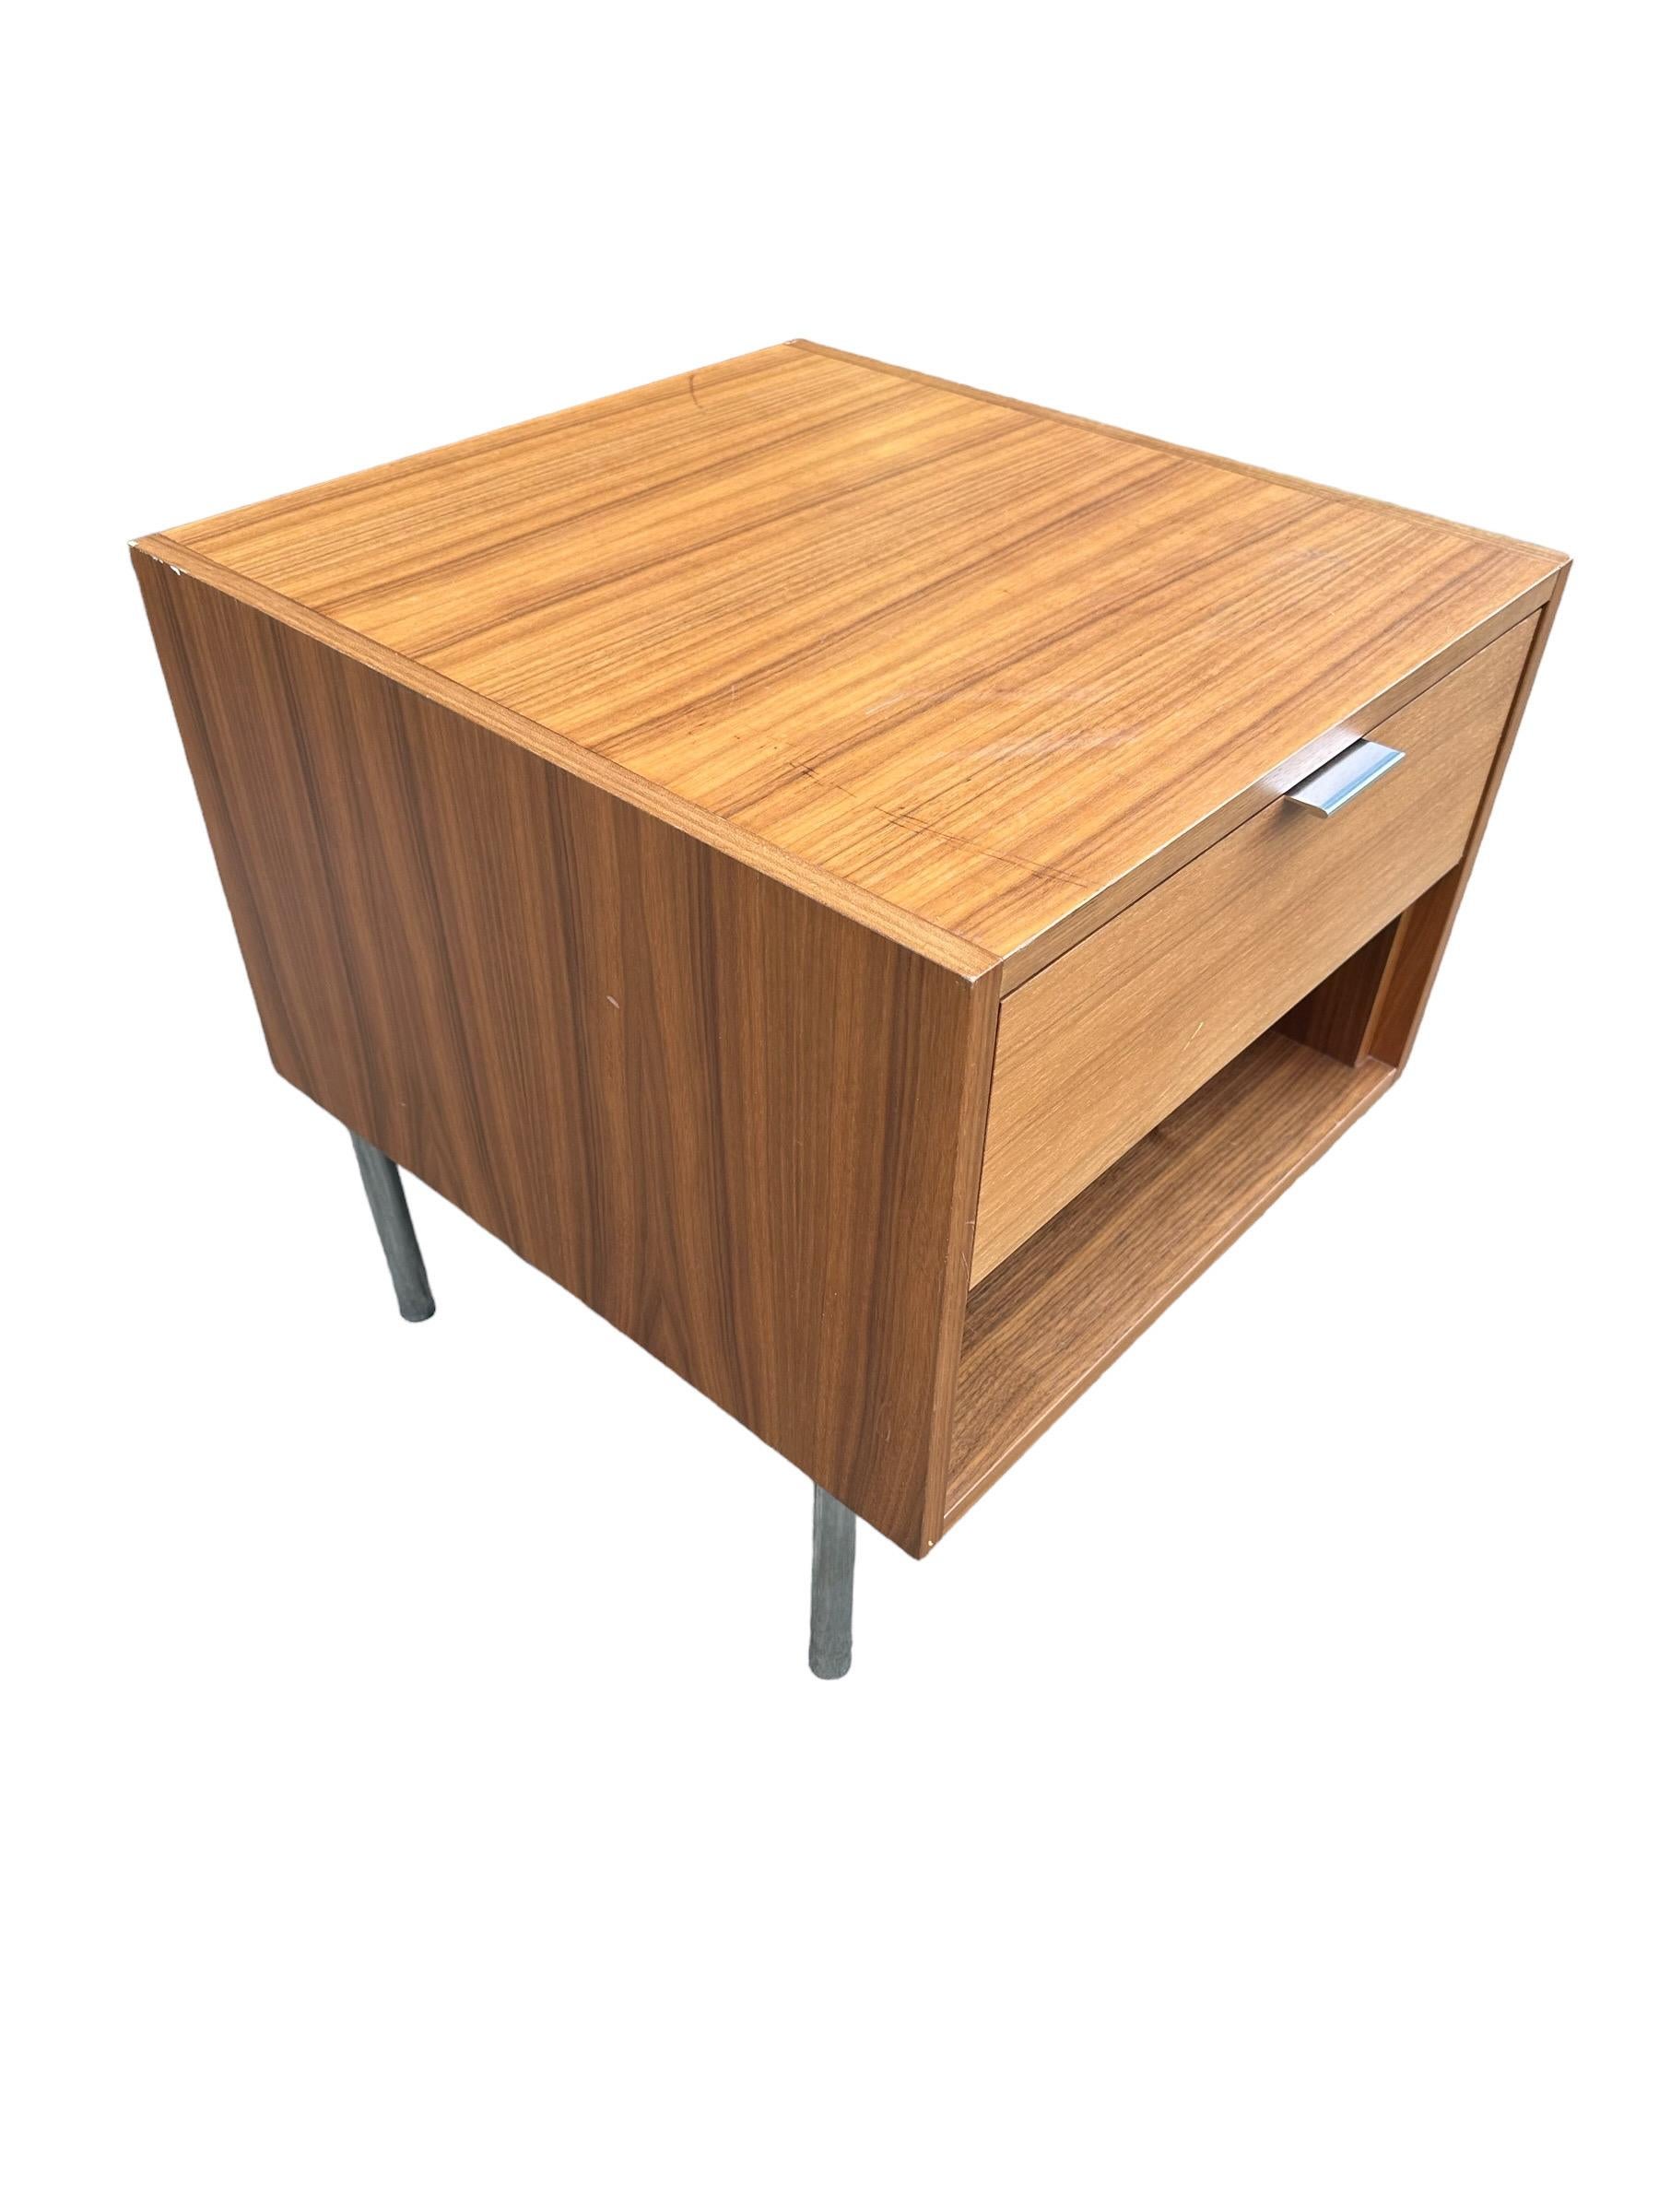 Spacious, smooth-gliding drawer. Compact size. European hardware. Defined by spacious drawers, clean lines and quartersawn heartwood veneers of walnut wood, the Rêve nightstand effortlessly organizes and complements a range of bedroom interiors.